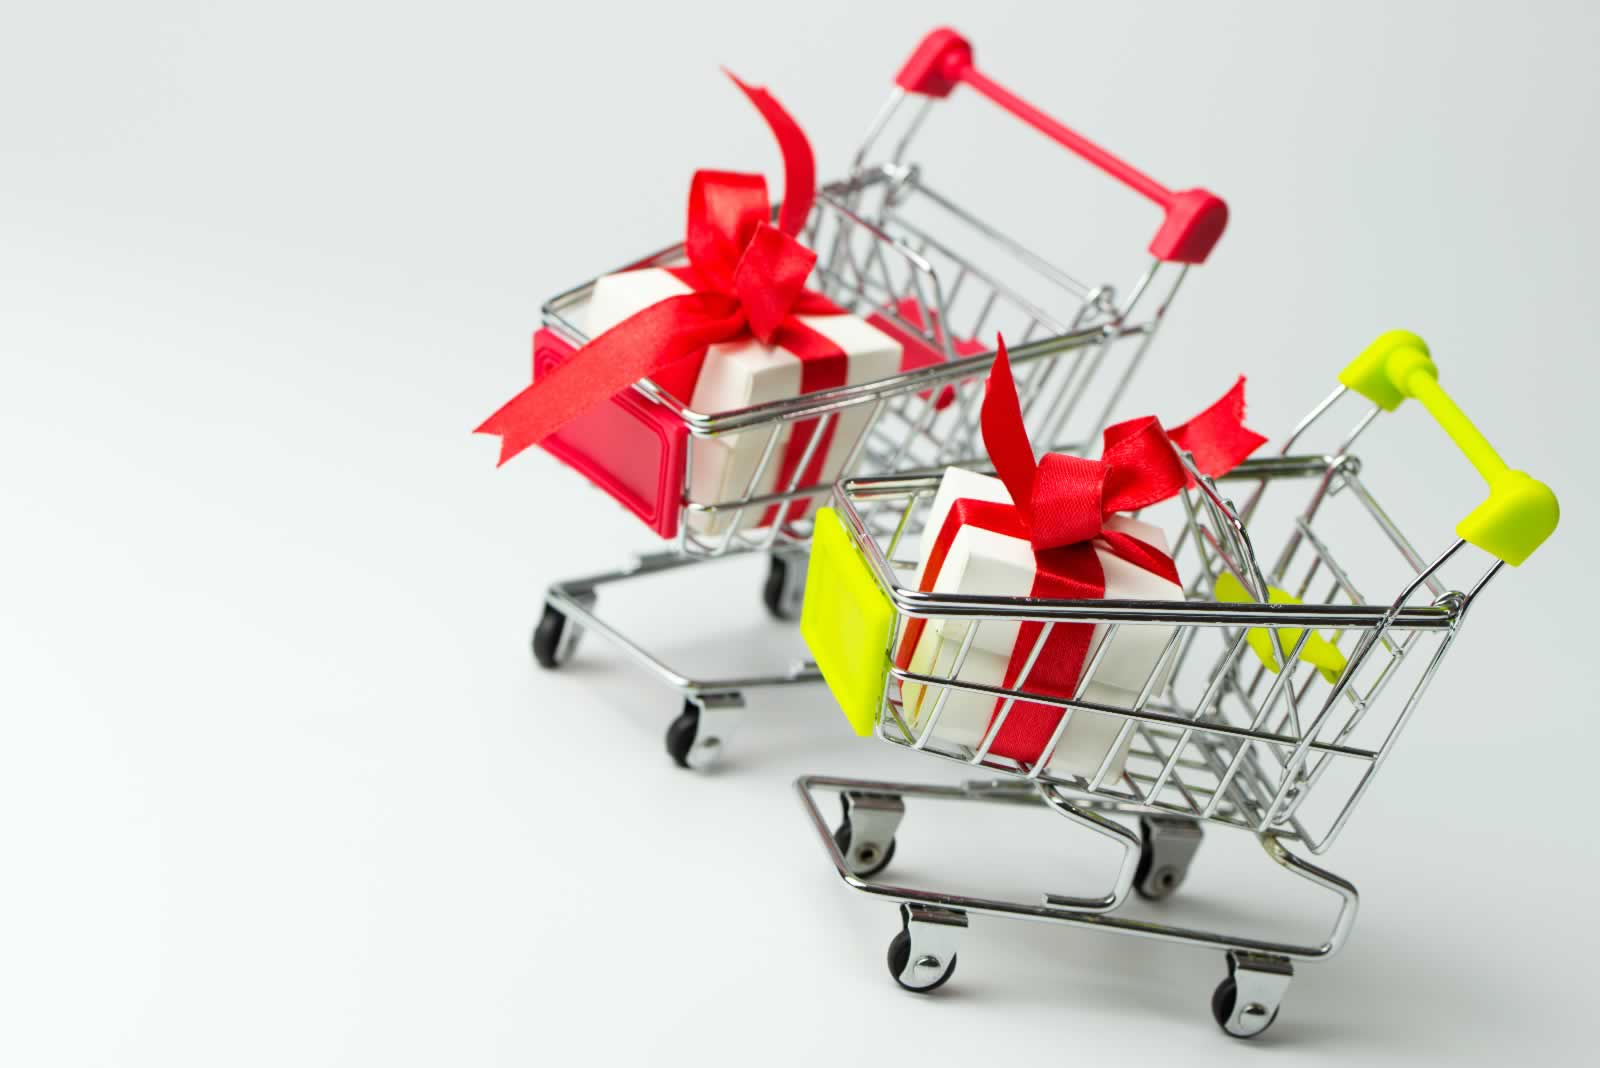 Red gift or presents box in a shopping cart, for sales promotion and rewards concept